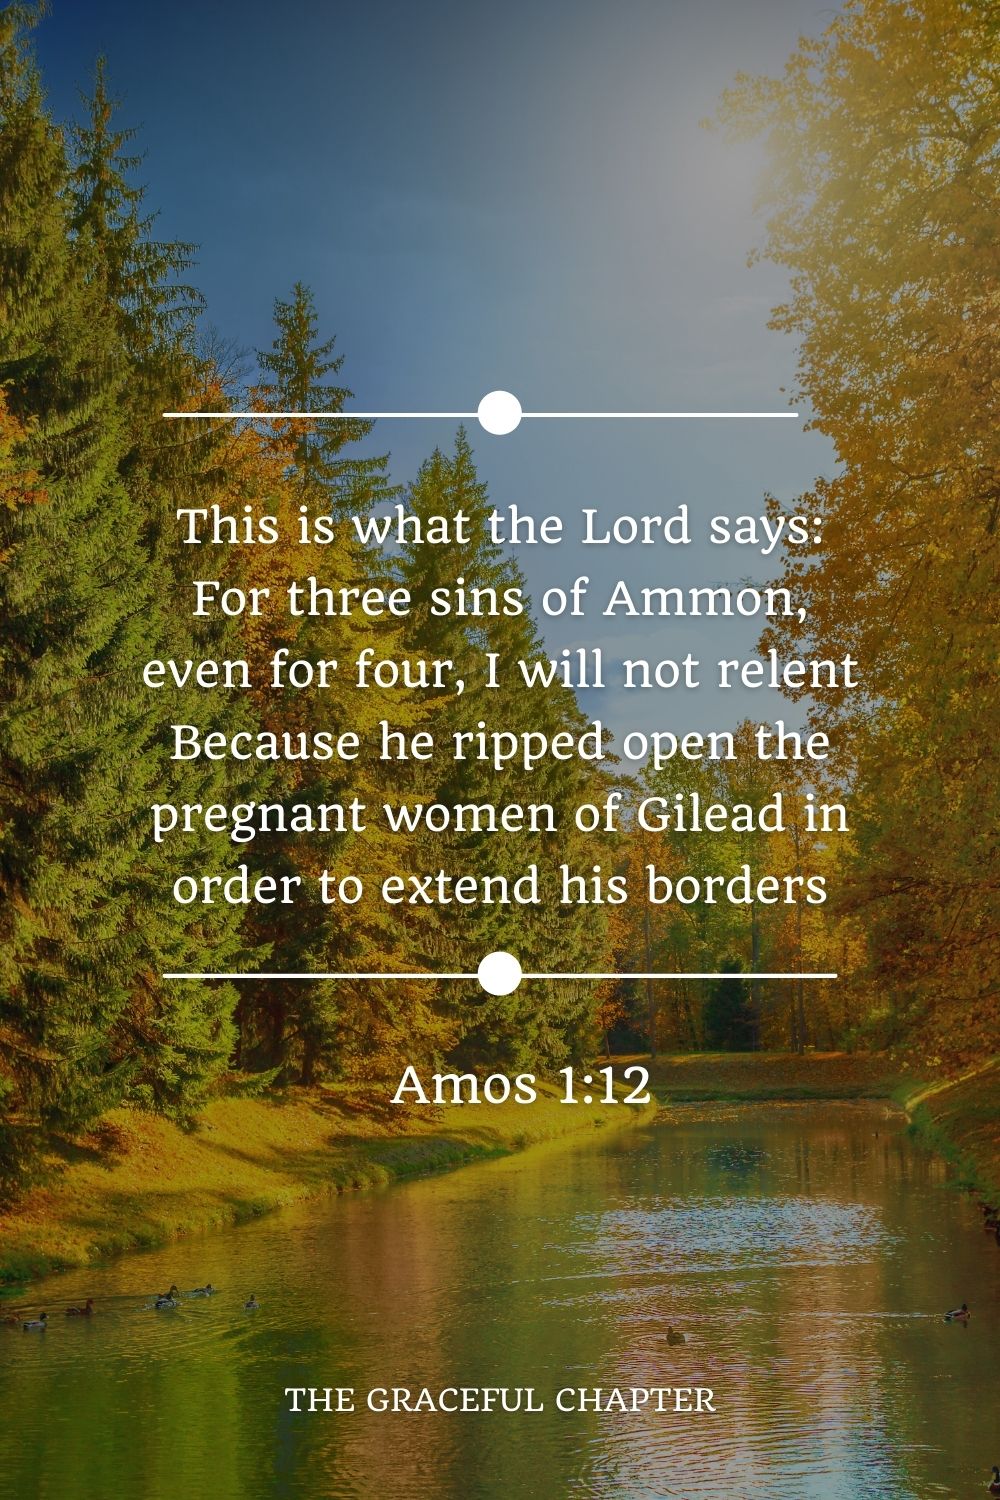 This is what the Lord says: For three sins of Ammon, even for four, I will not relent Because he ripped open the pregnant women of Gilead in order to extend his borders Amos 1:12